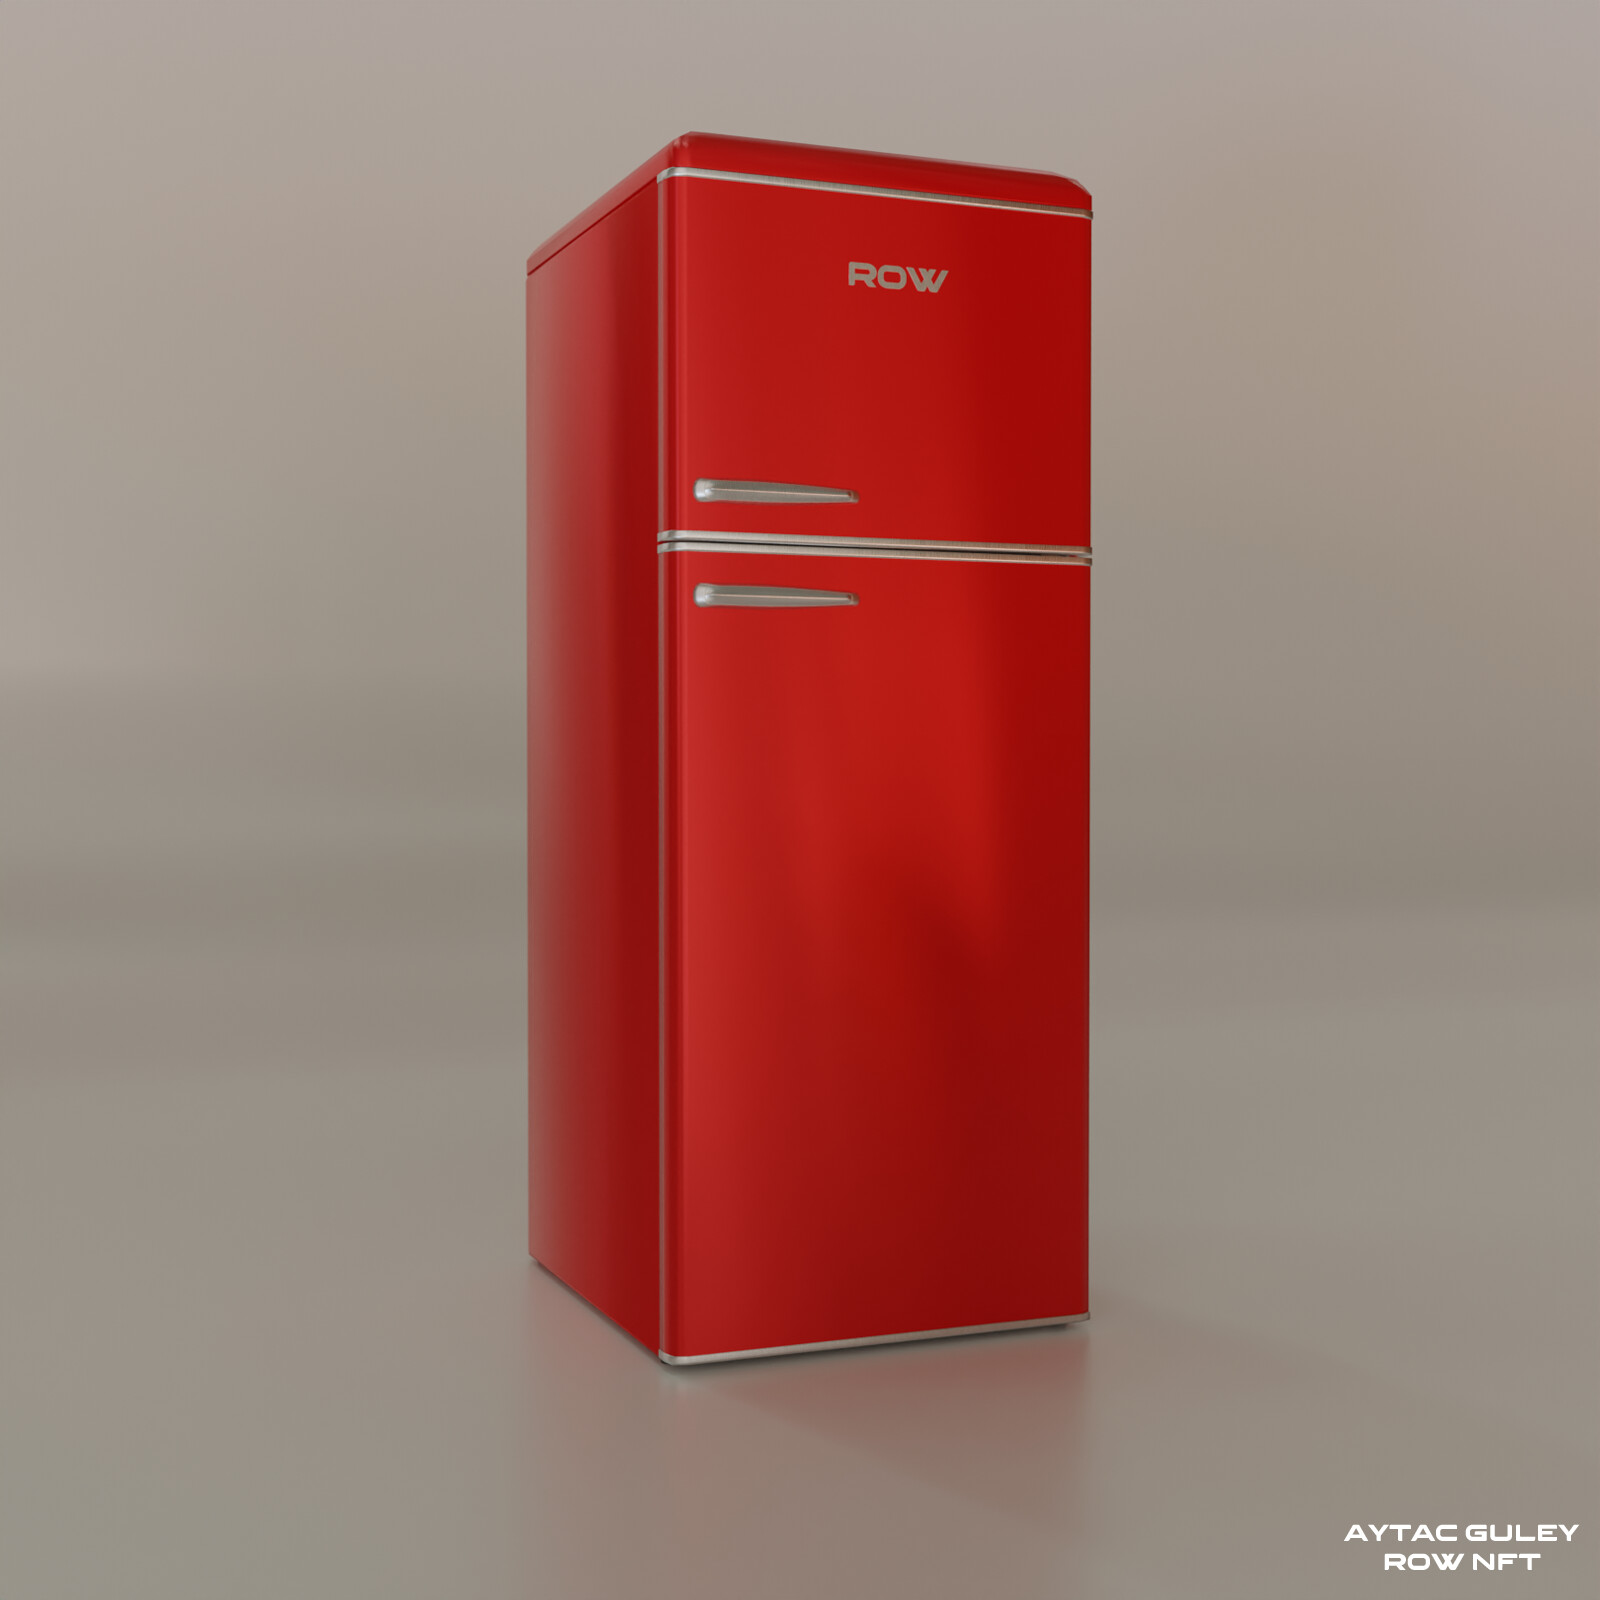 Classic Red Refrigerator For A Vintage Inspired Kitchen 3d